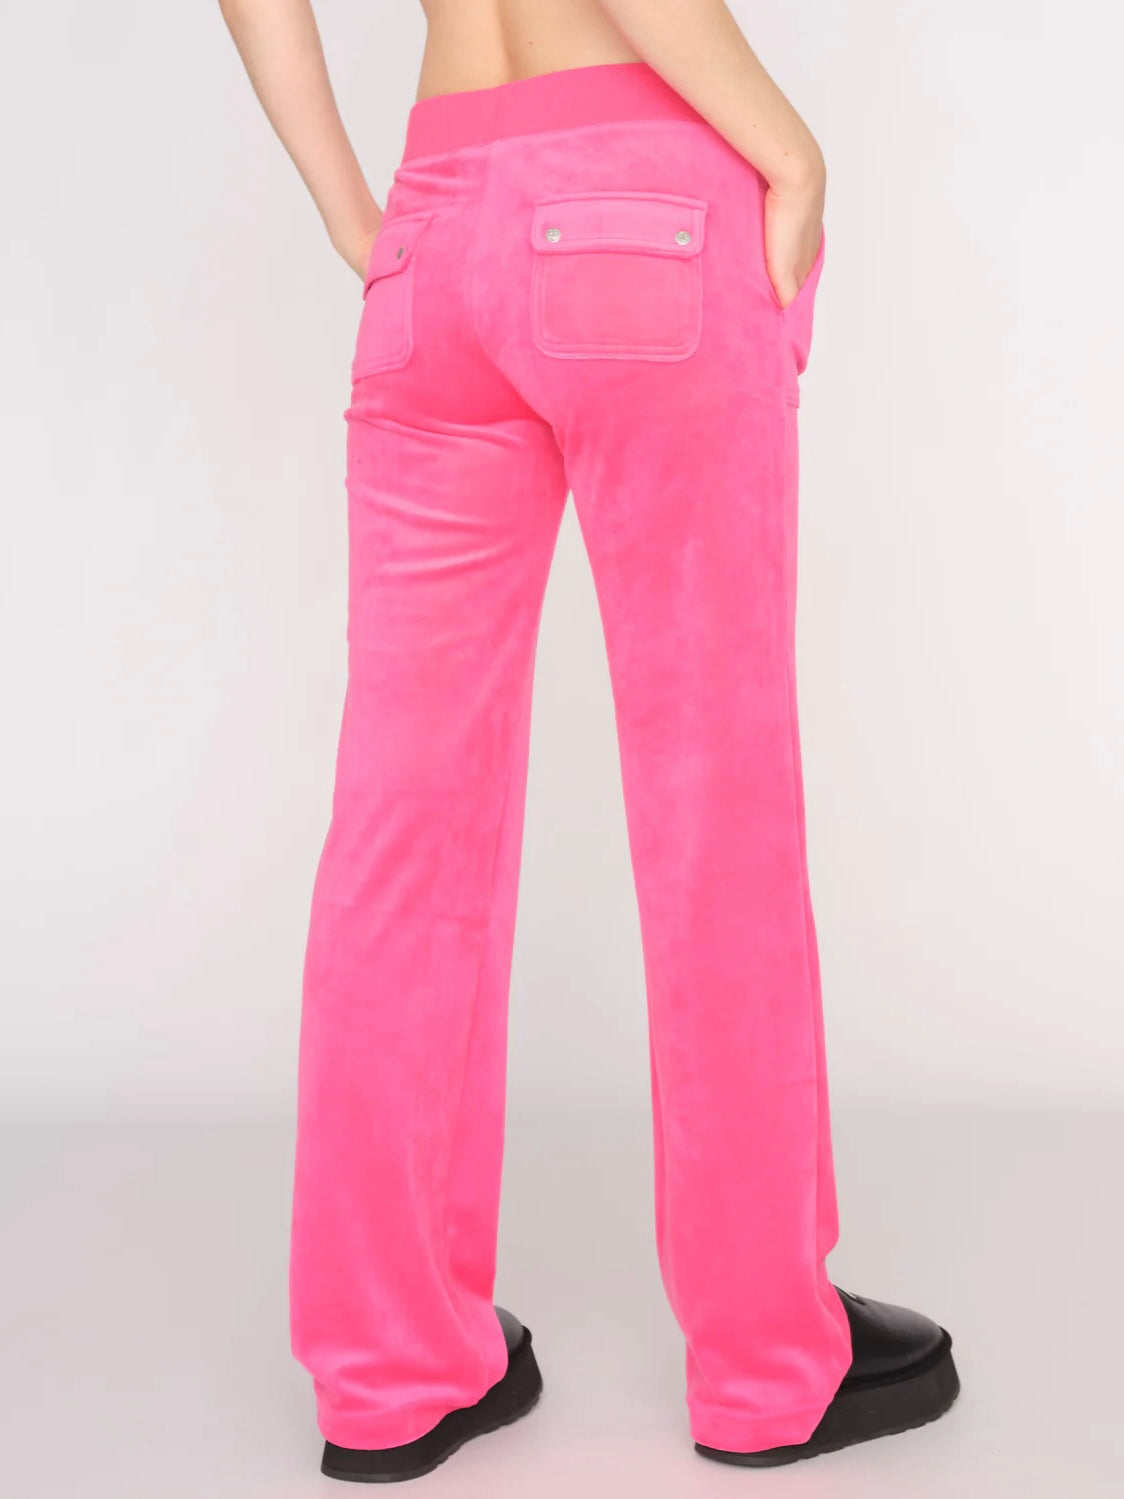 
                  
                    JUICY COUTURE DEL RAY POCKET PANTS PINK GLO
                  
                